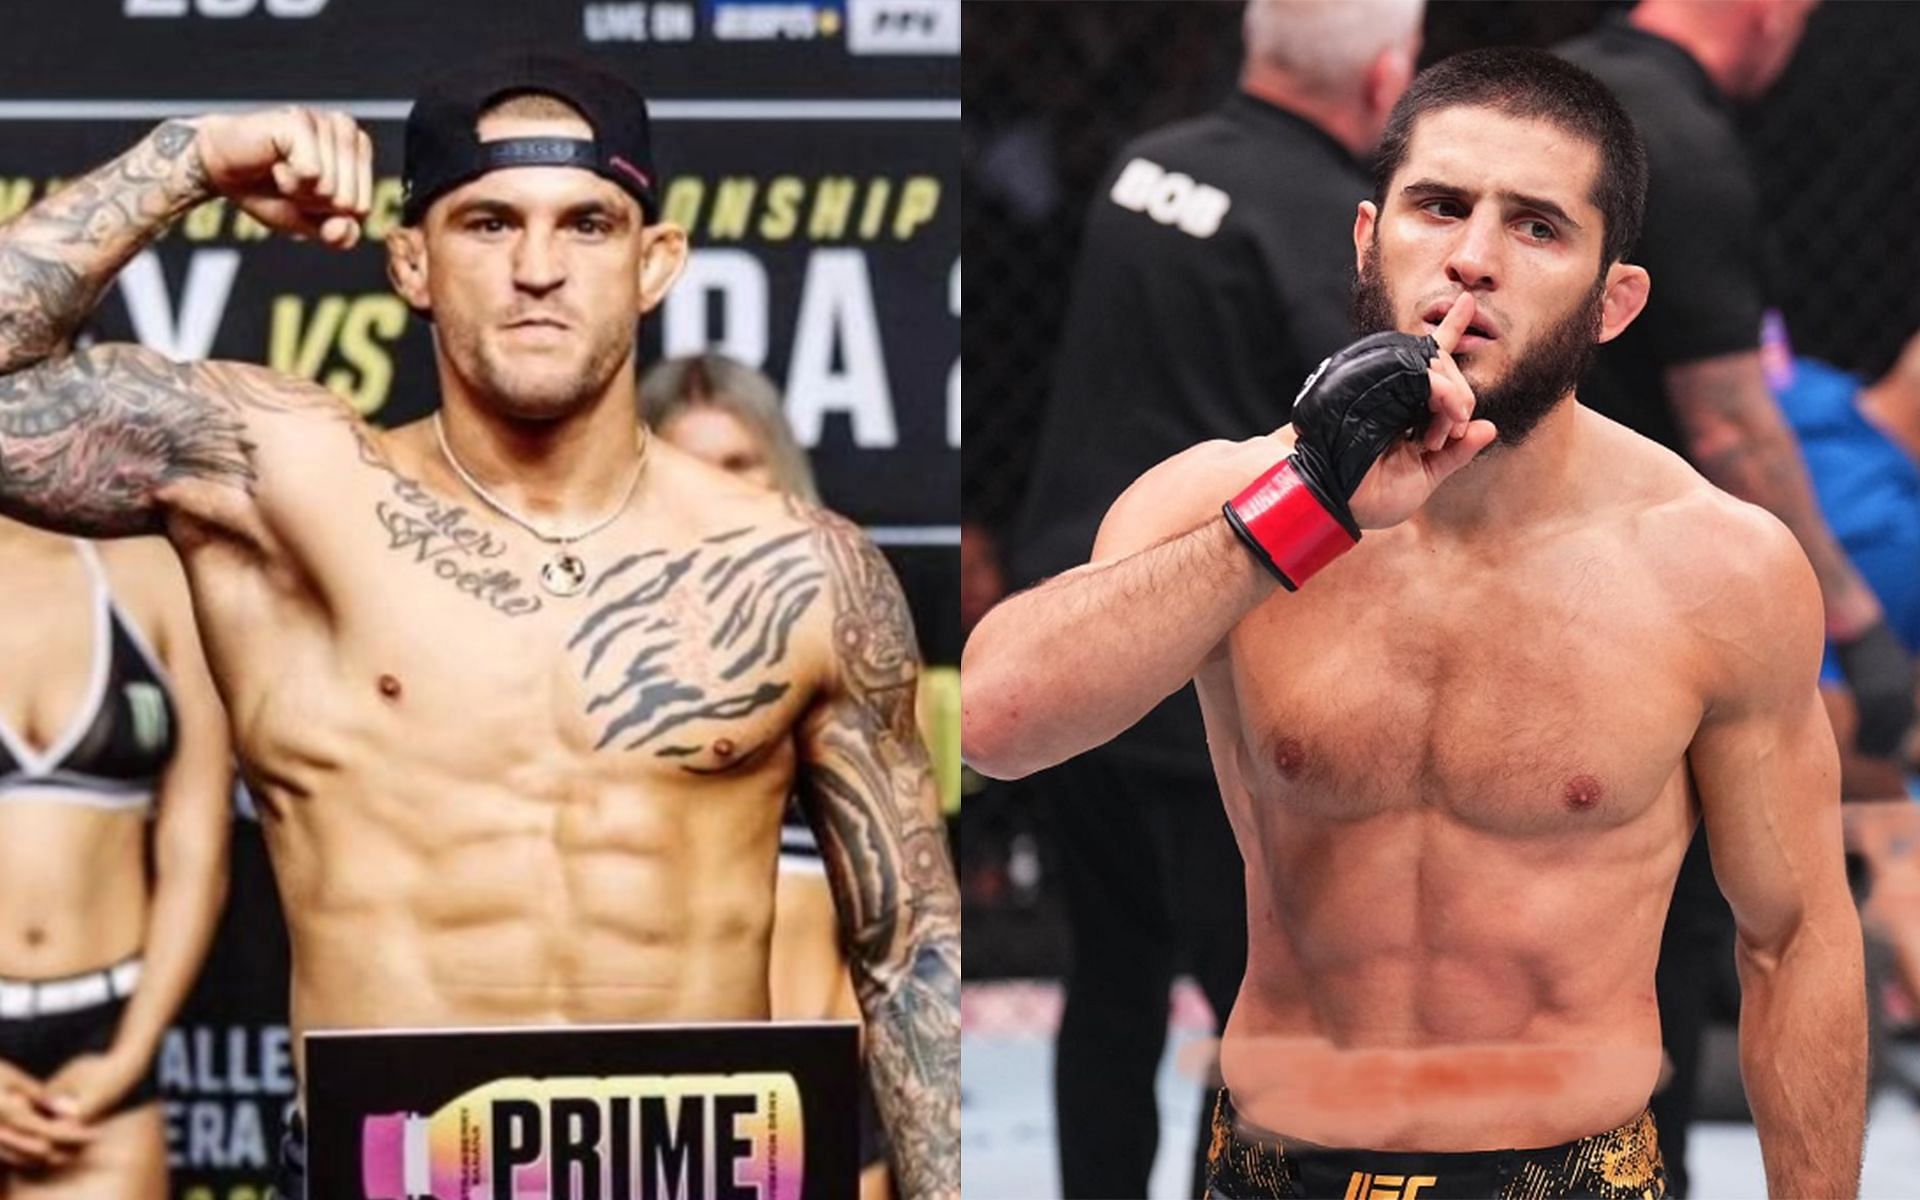 Dustin Poirier (left) and Islam Makhachev (right) have been gunning for a title fight clash [Images Courtesy: @dustinpoirier and @islam_makhachev Instagram]